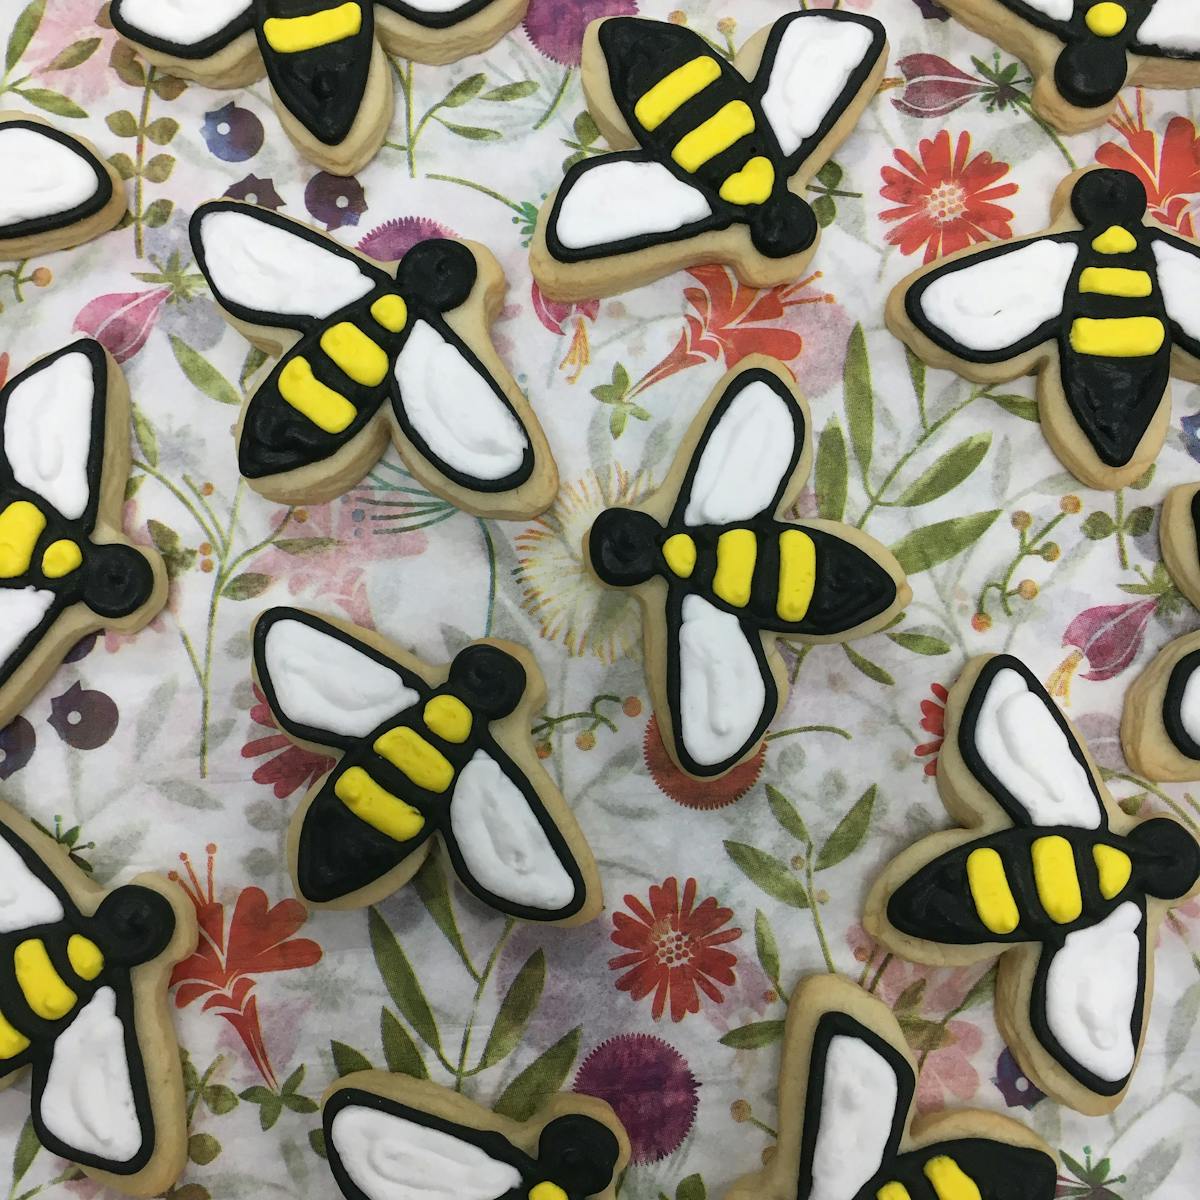 bees on top of floral paper